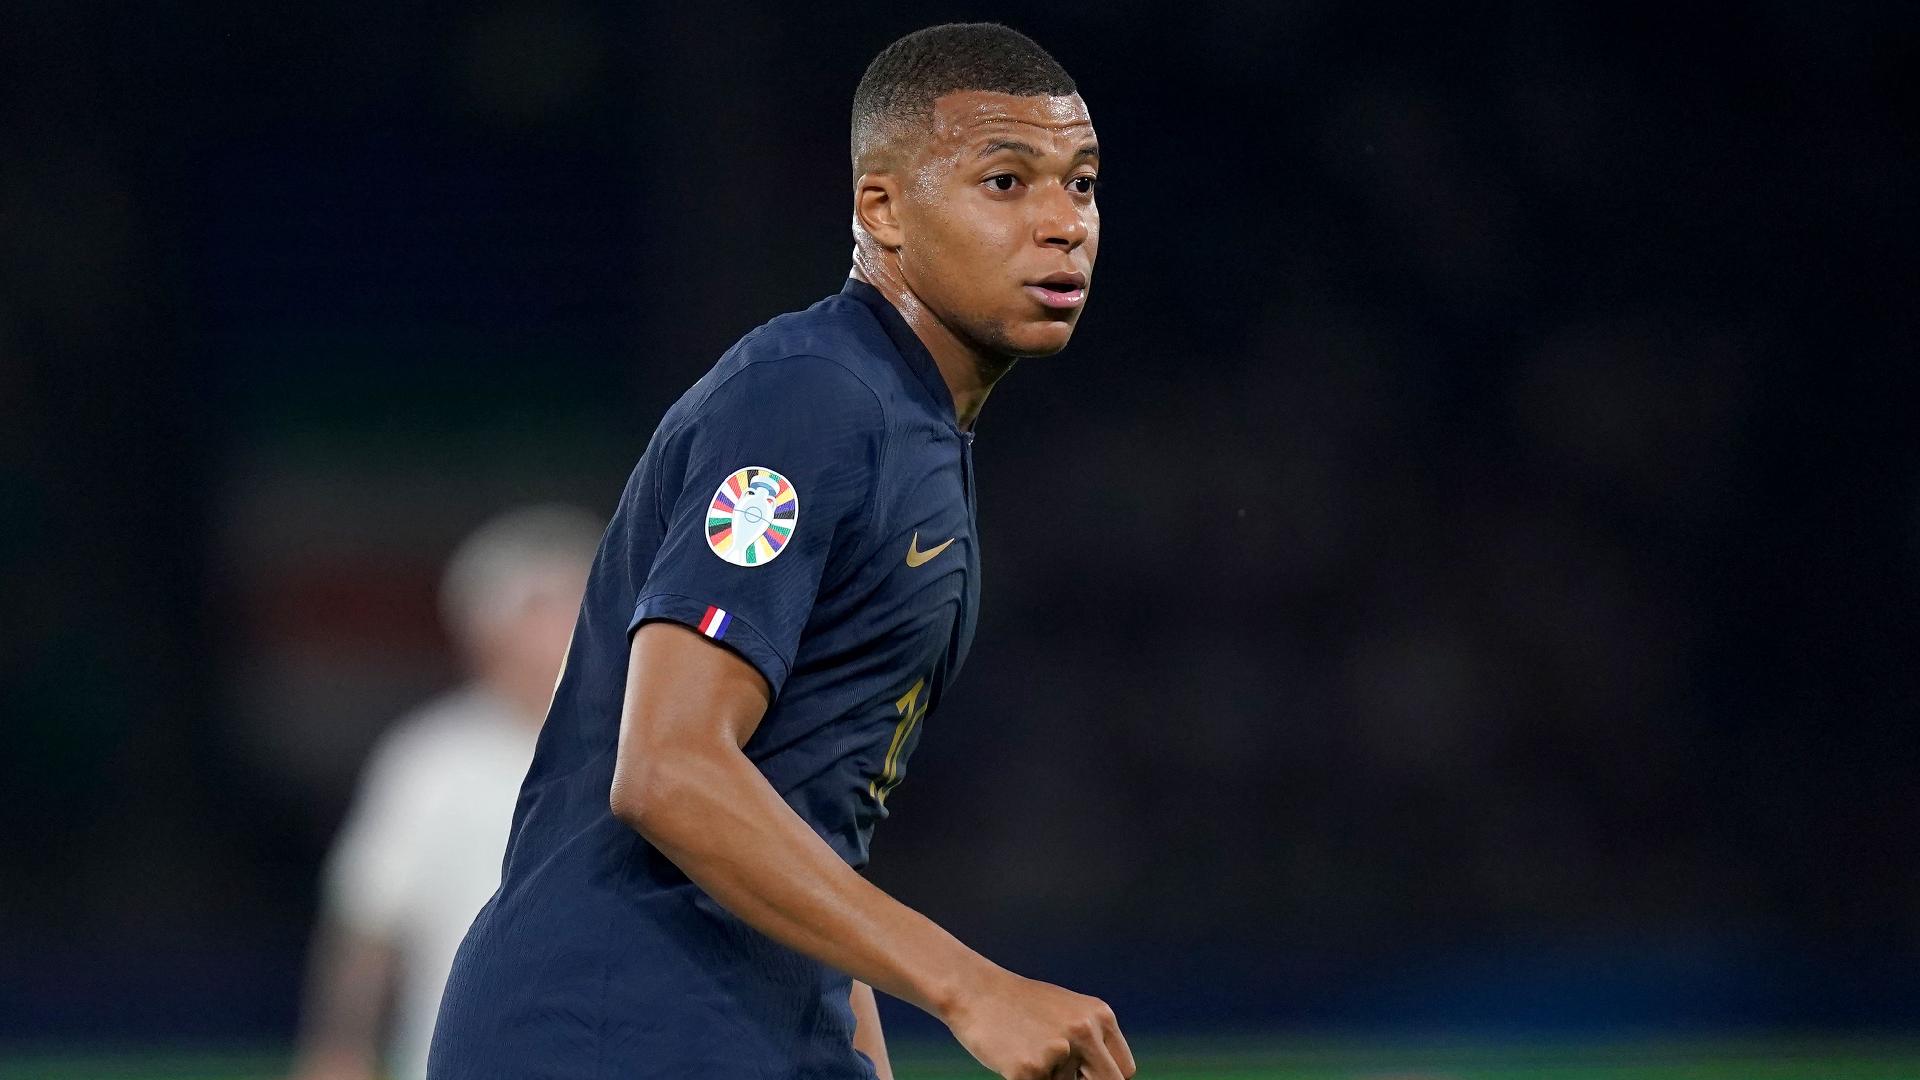 Germany defeat a ‘warning’, but no more, says France’s Kylian Mbappe